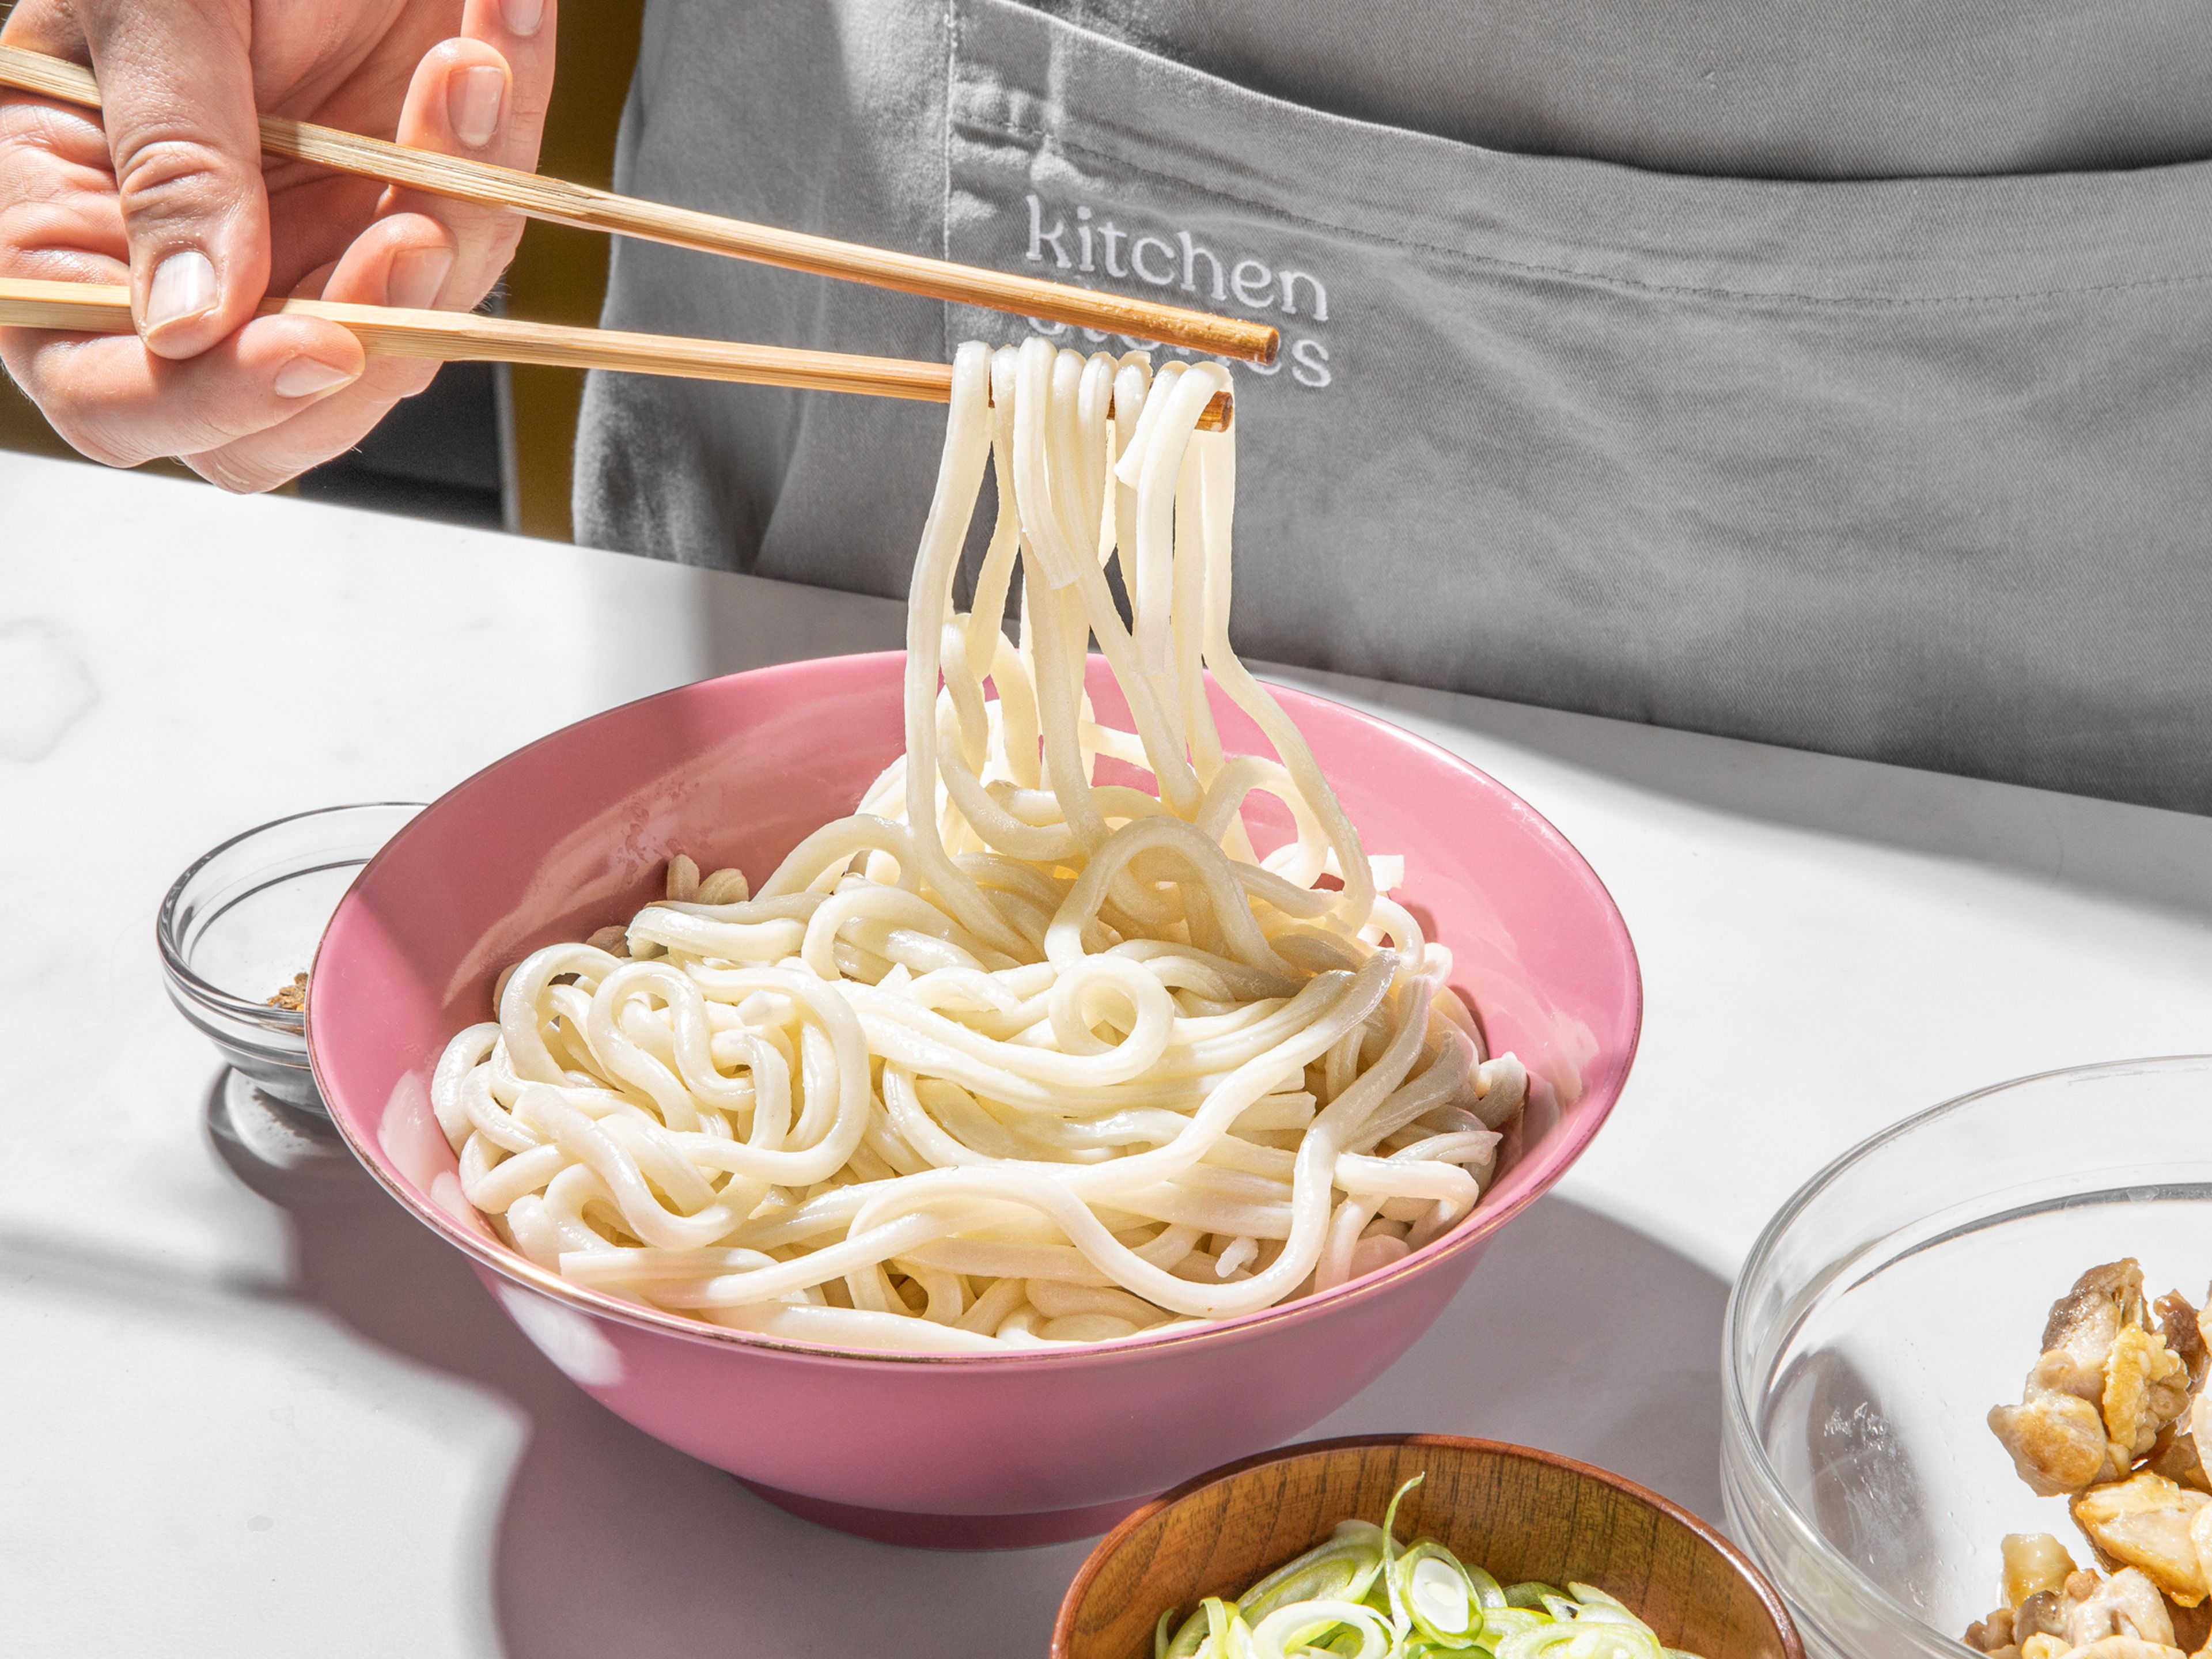 Cook udon noodles according to package instructions and drain. Equally divide noodles and chicken into two bowls and cover with soup. Garnish with scallions and shichimi togarashi or a jammy egg, if desired. Enjoy!